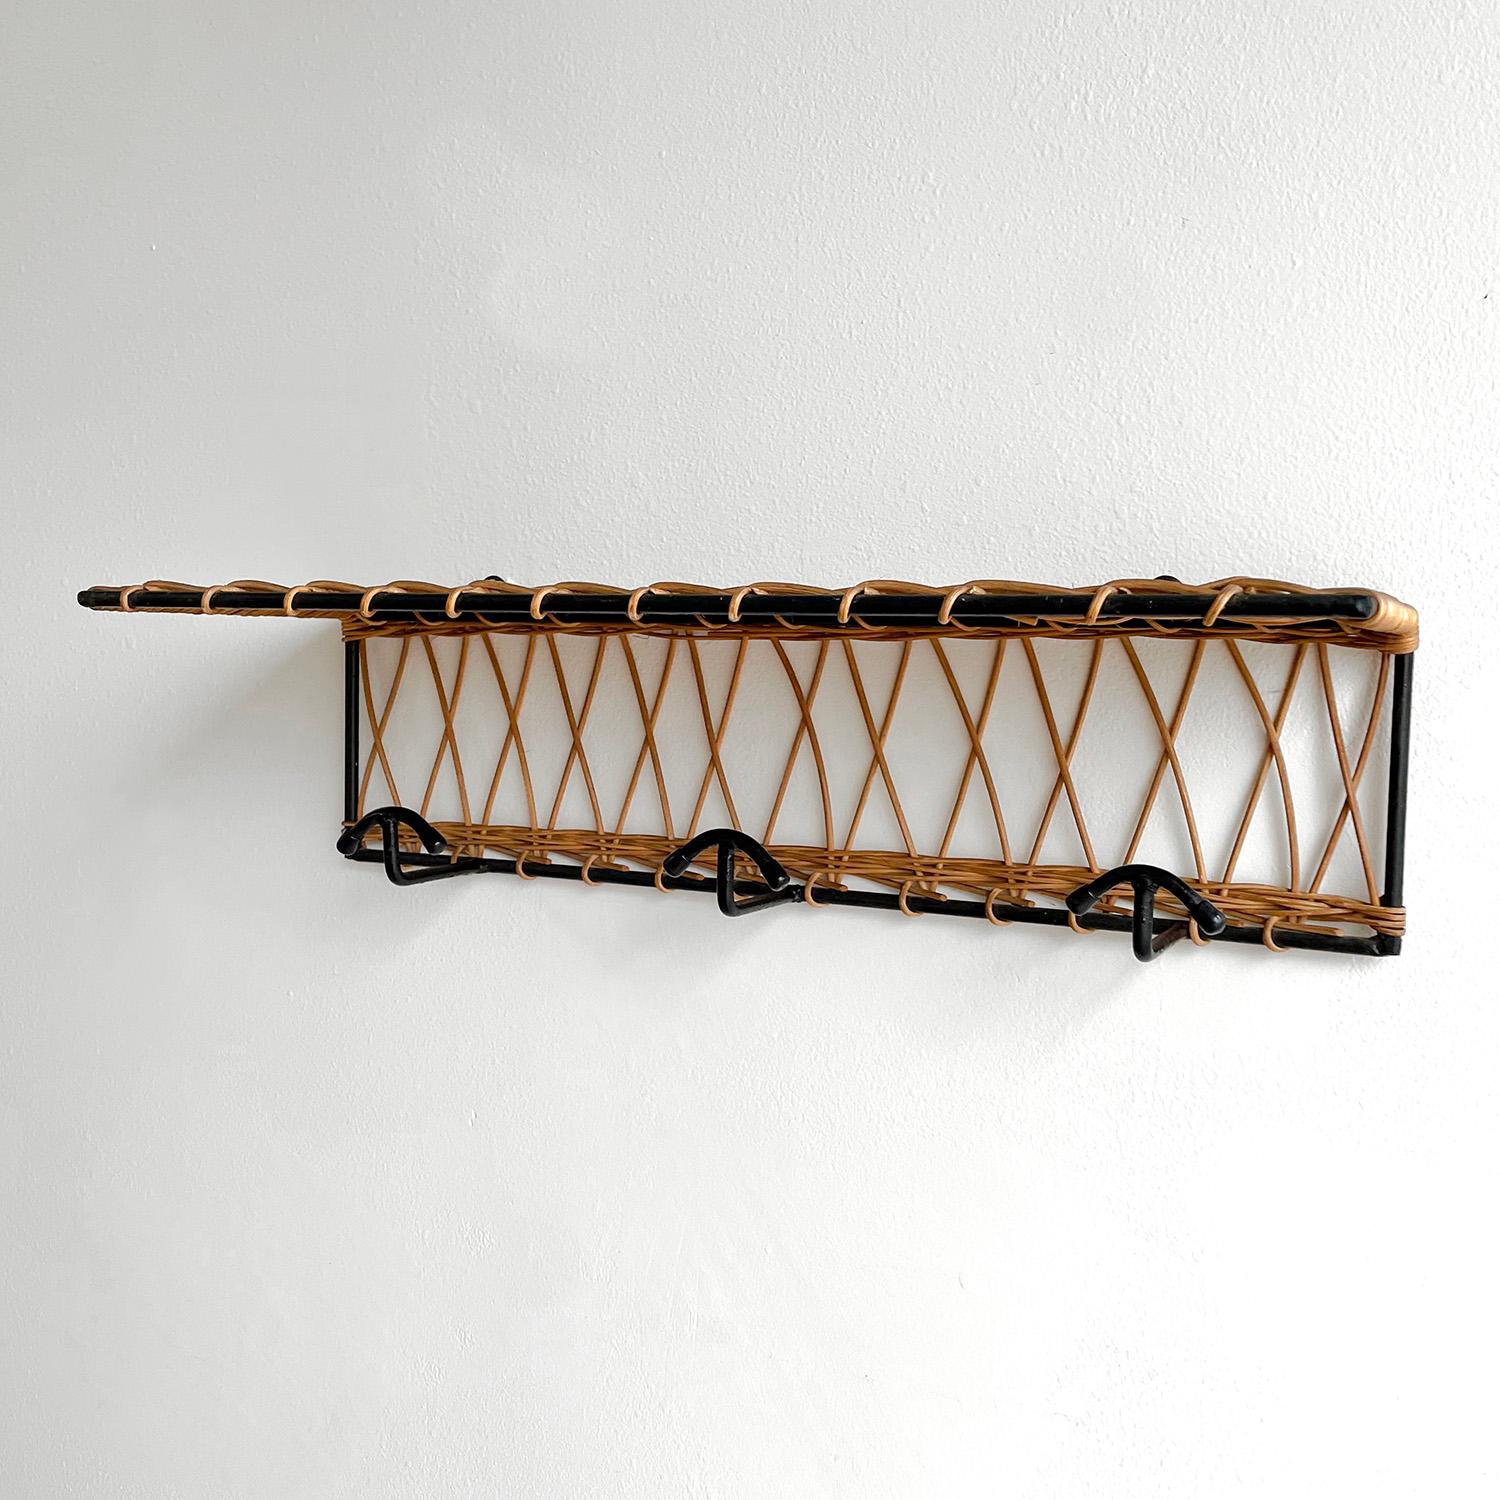 French willow coat rack in the style of Jacques Adnet
France, circa 1950’s
Three coat hooks with upper storage shelf.